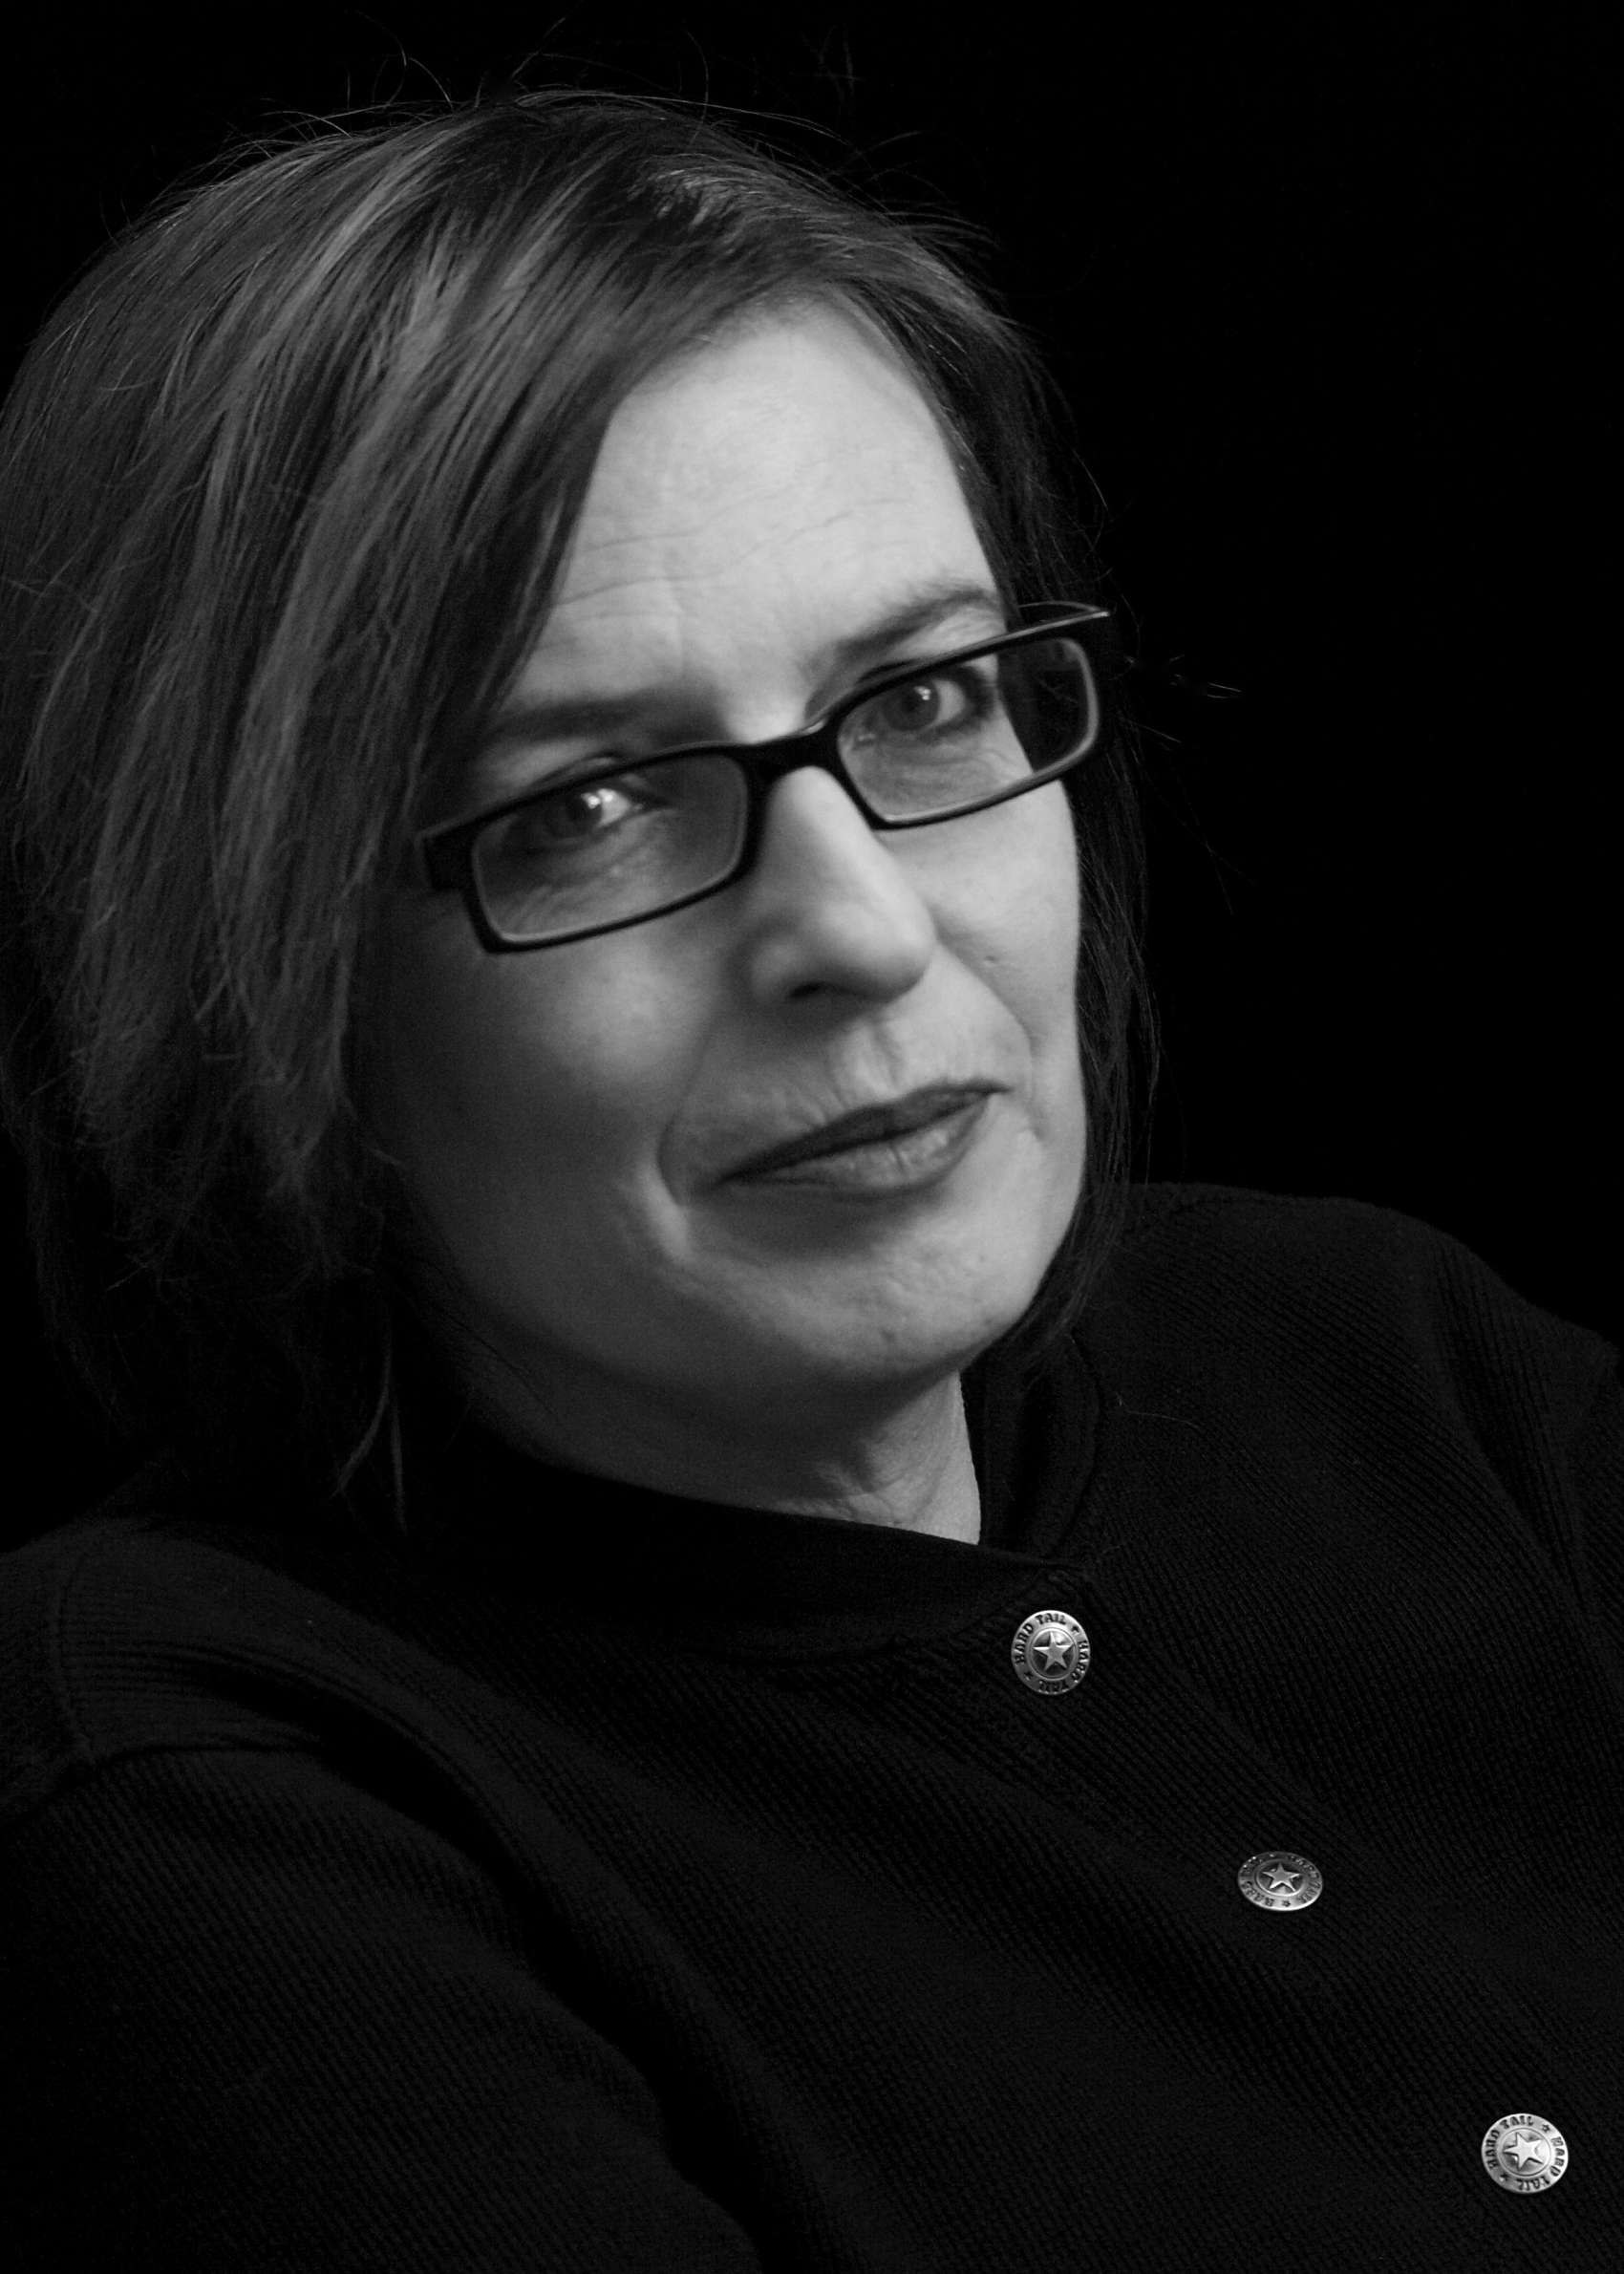 Black and white profile of woman wearing glasses